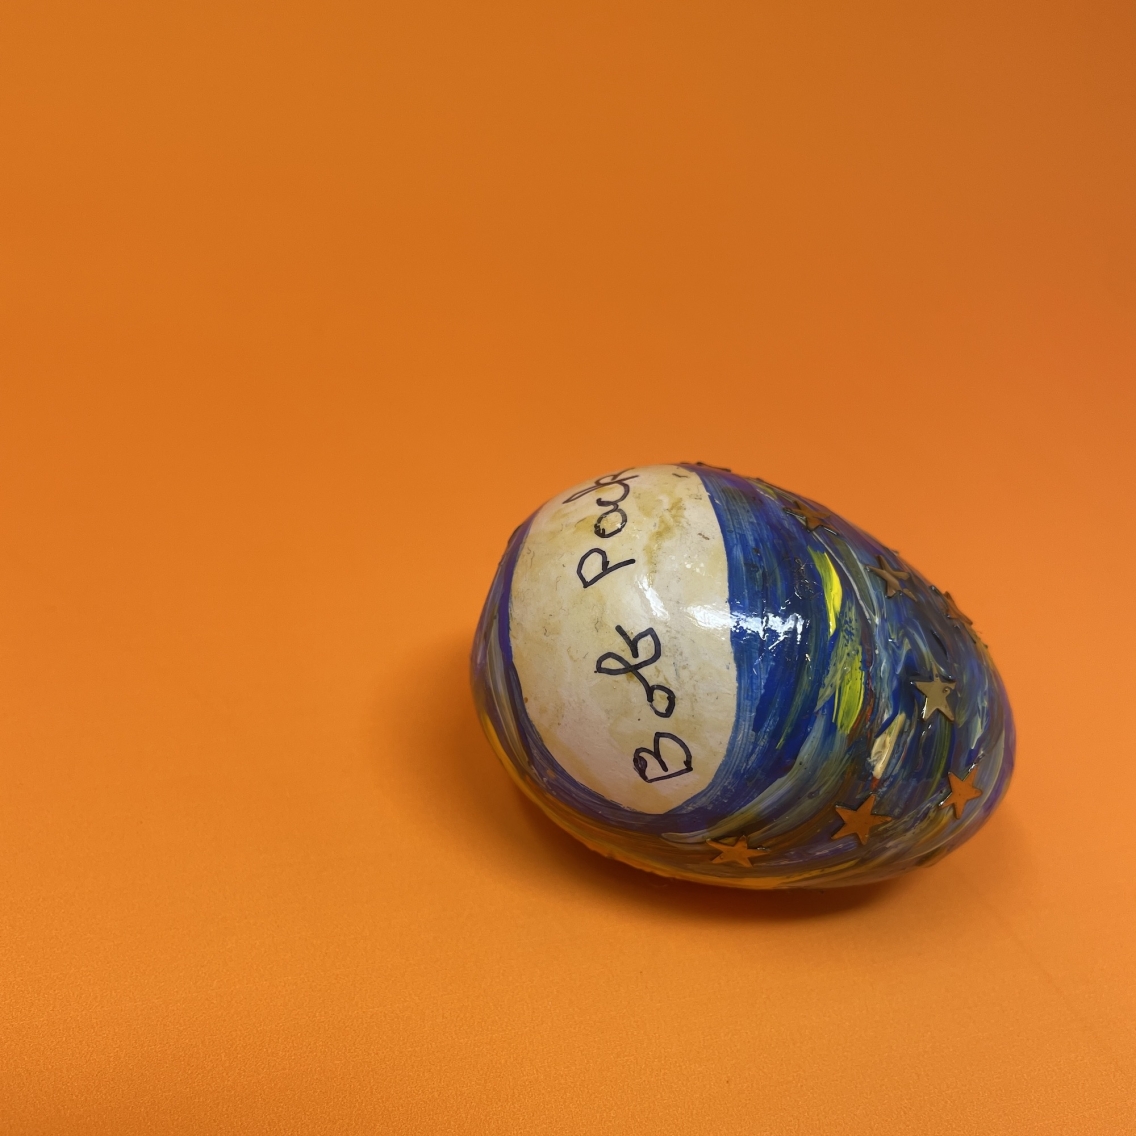 Painted wooden egg with the name "Bob Pack" signed, against orange background